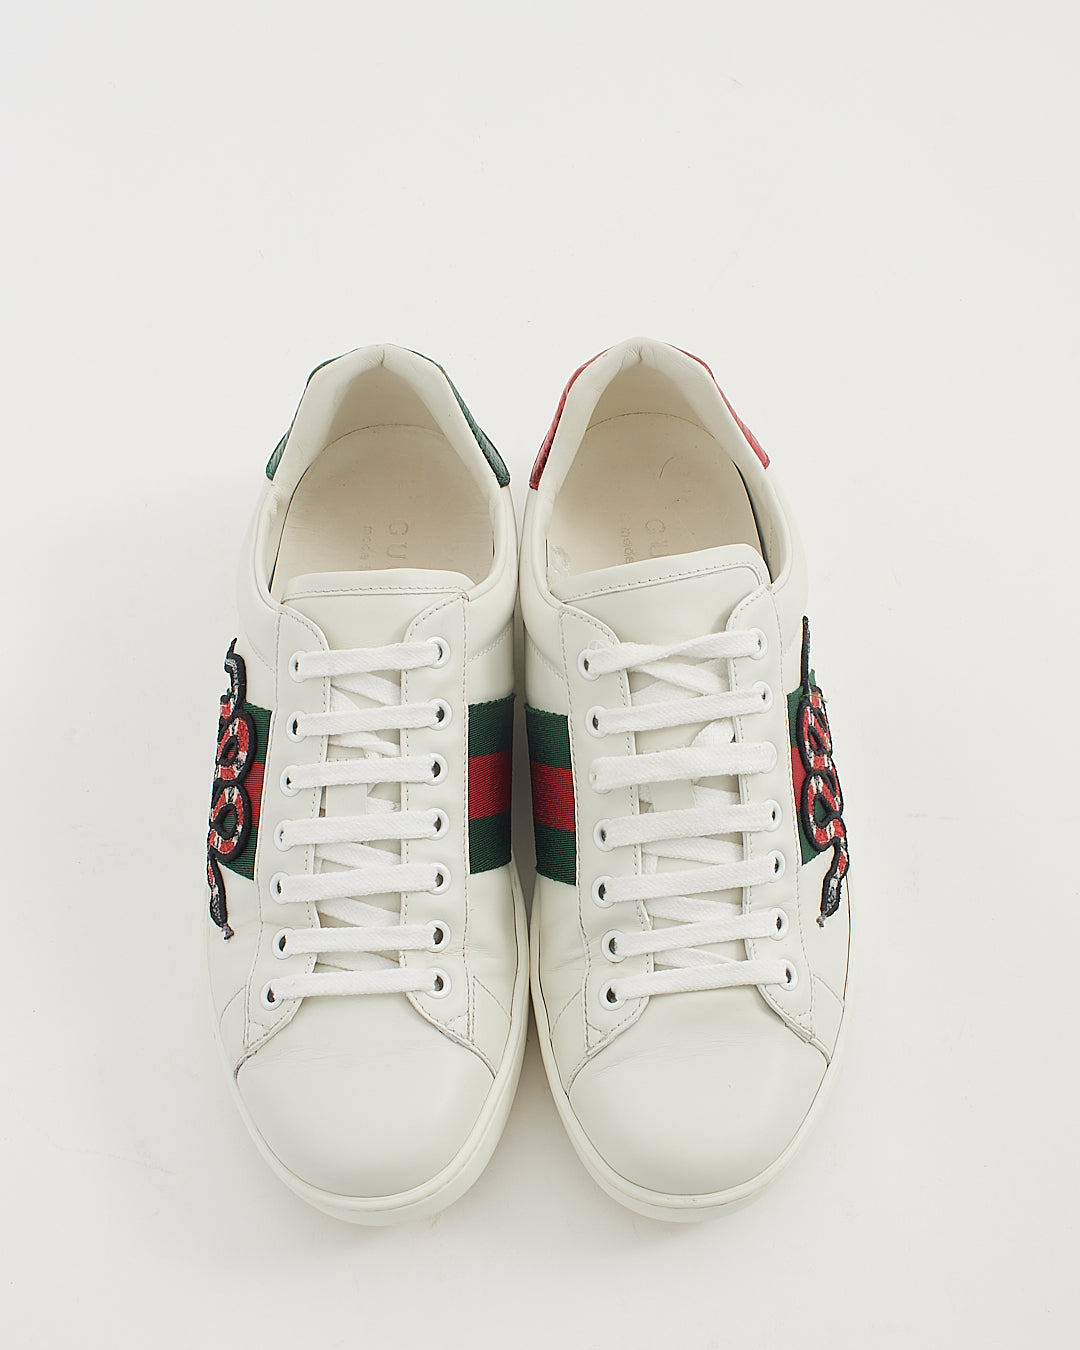 Gucci Baskets Ace Web Snake blanches pour hommes - 37 (M)